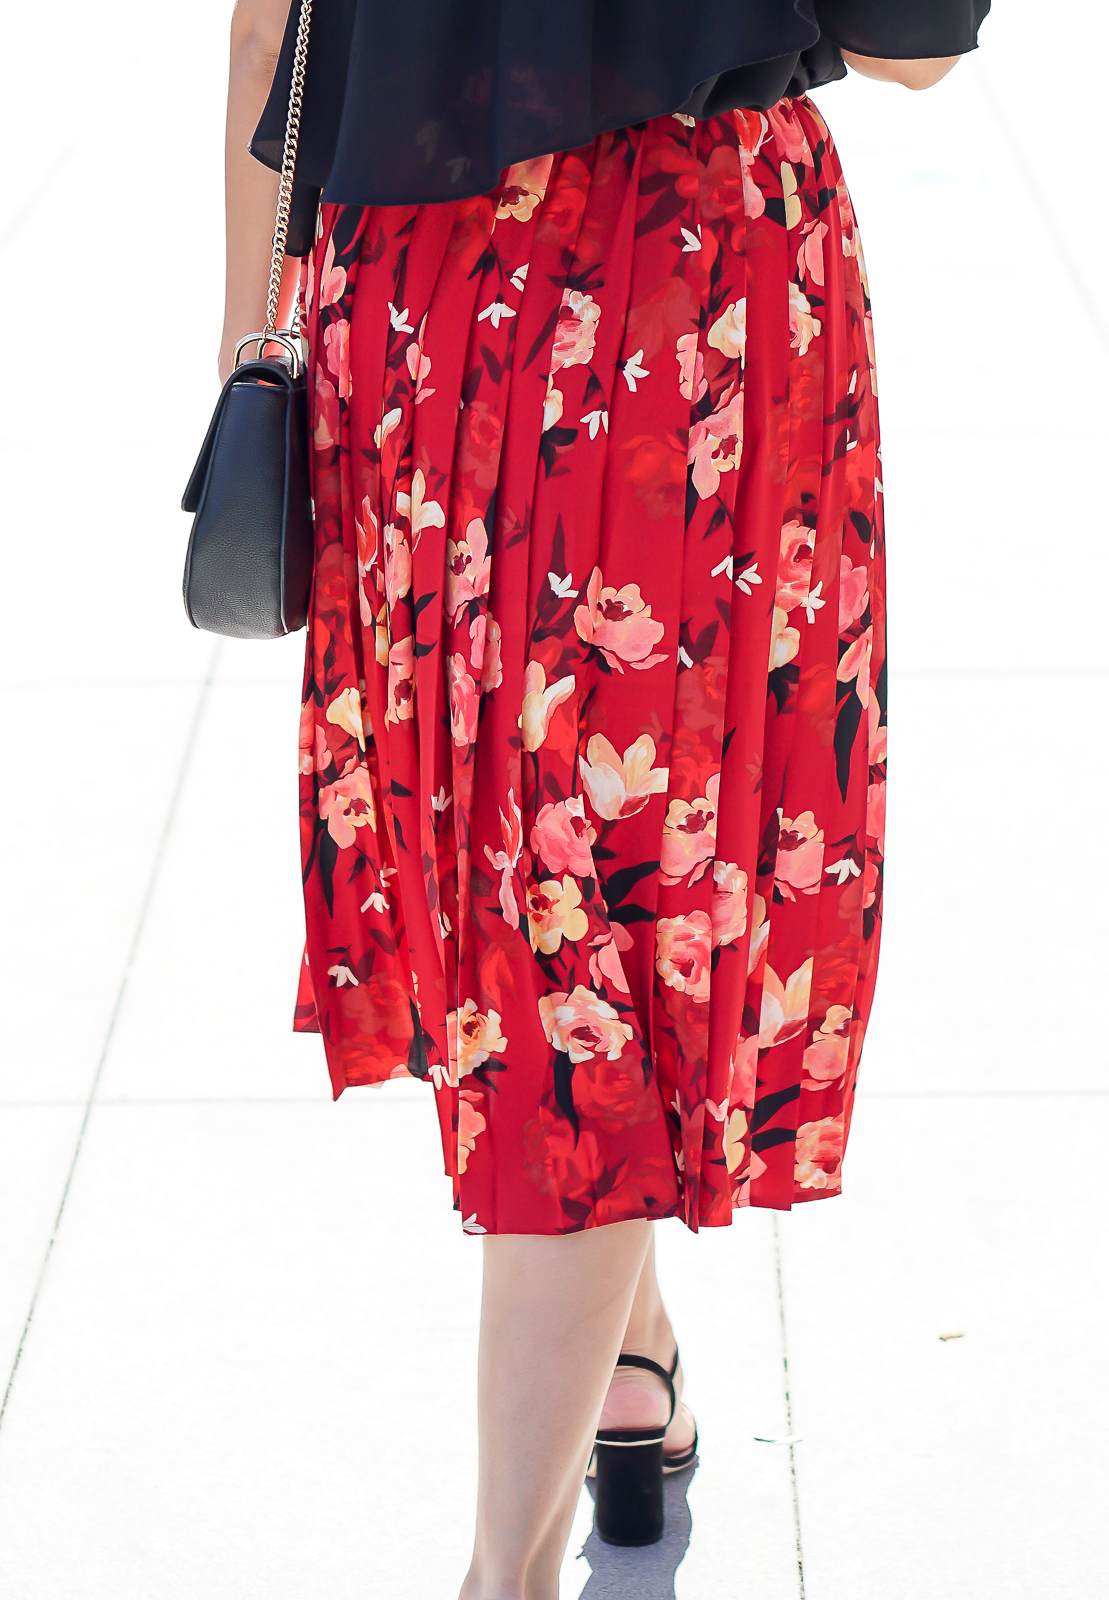 H&M Red Floral Midi Skirt, Red Floral Midi Skirt, Red H&M Skirt, Black Gucci Marmont Sandals, Black Gucci Suede GG Logo Sandals, Black Suede Marmont Sandals, Gucci Marmont 75mm black Suede Sandals, Downtown Los Angeles Photography, City Hall Photography